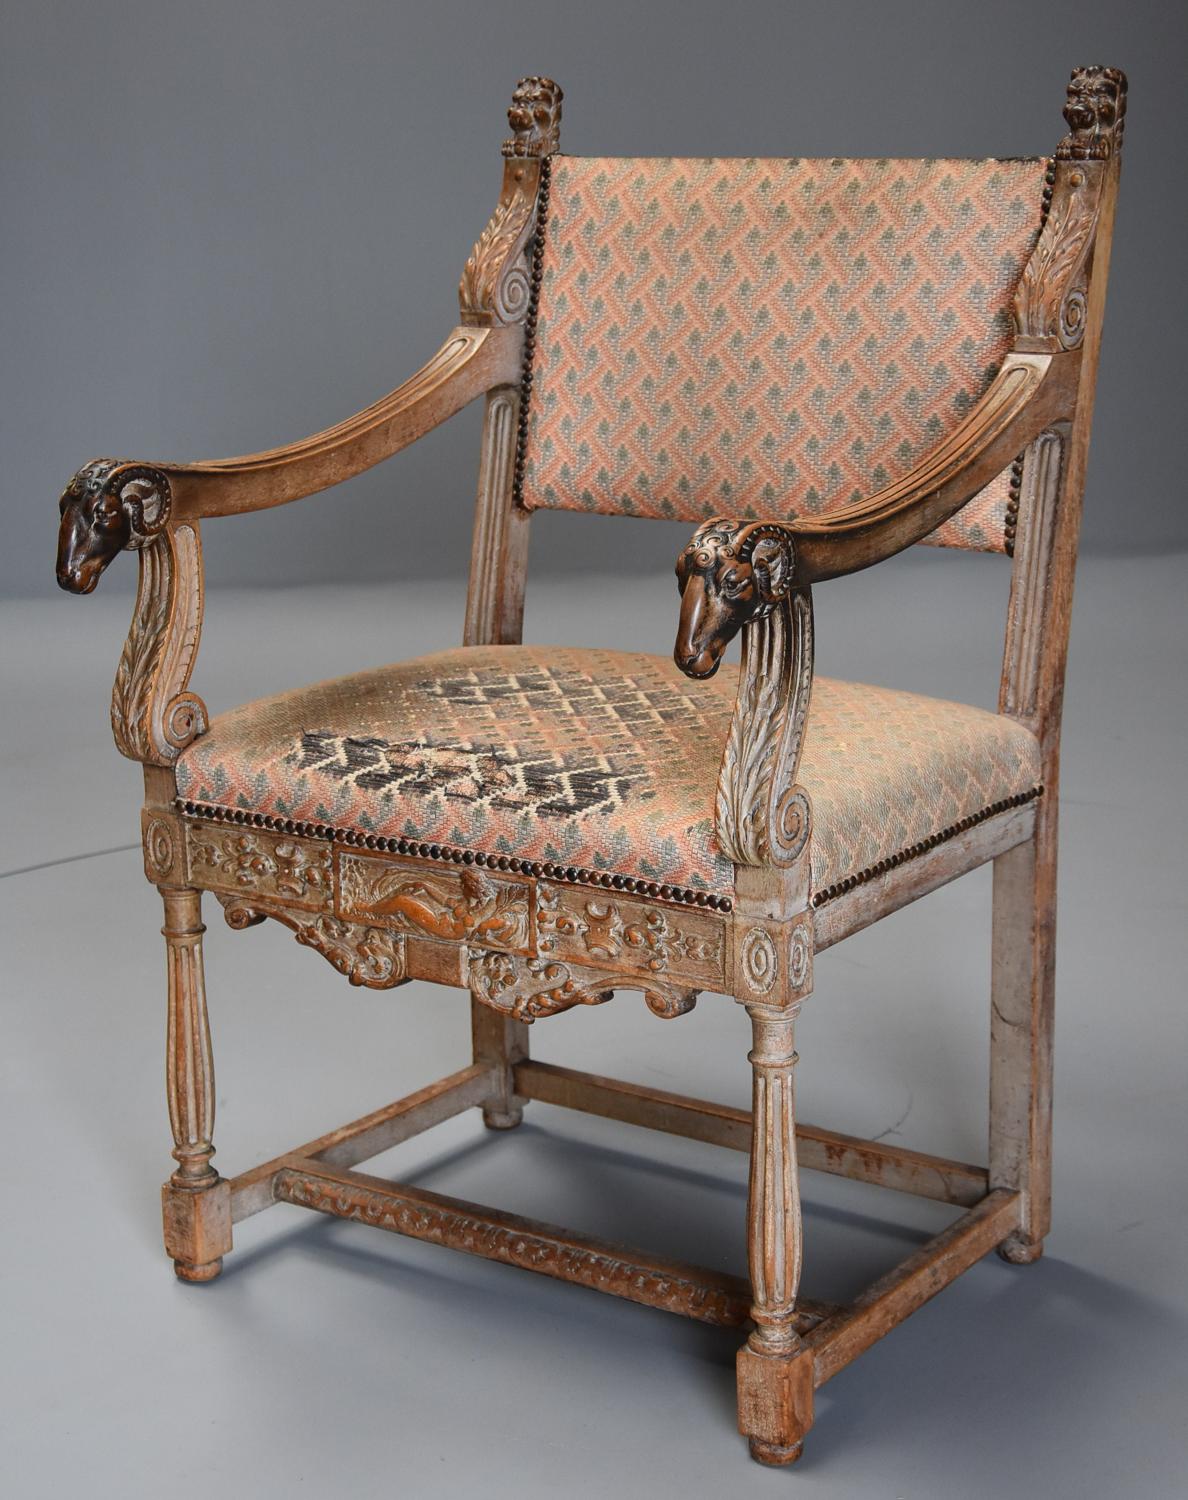 19thc highly decorative Renaissance style French limed oak armchair